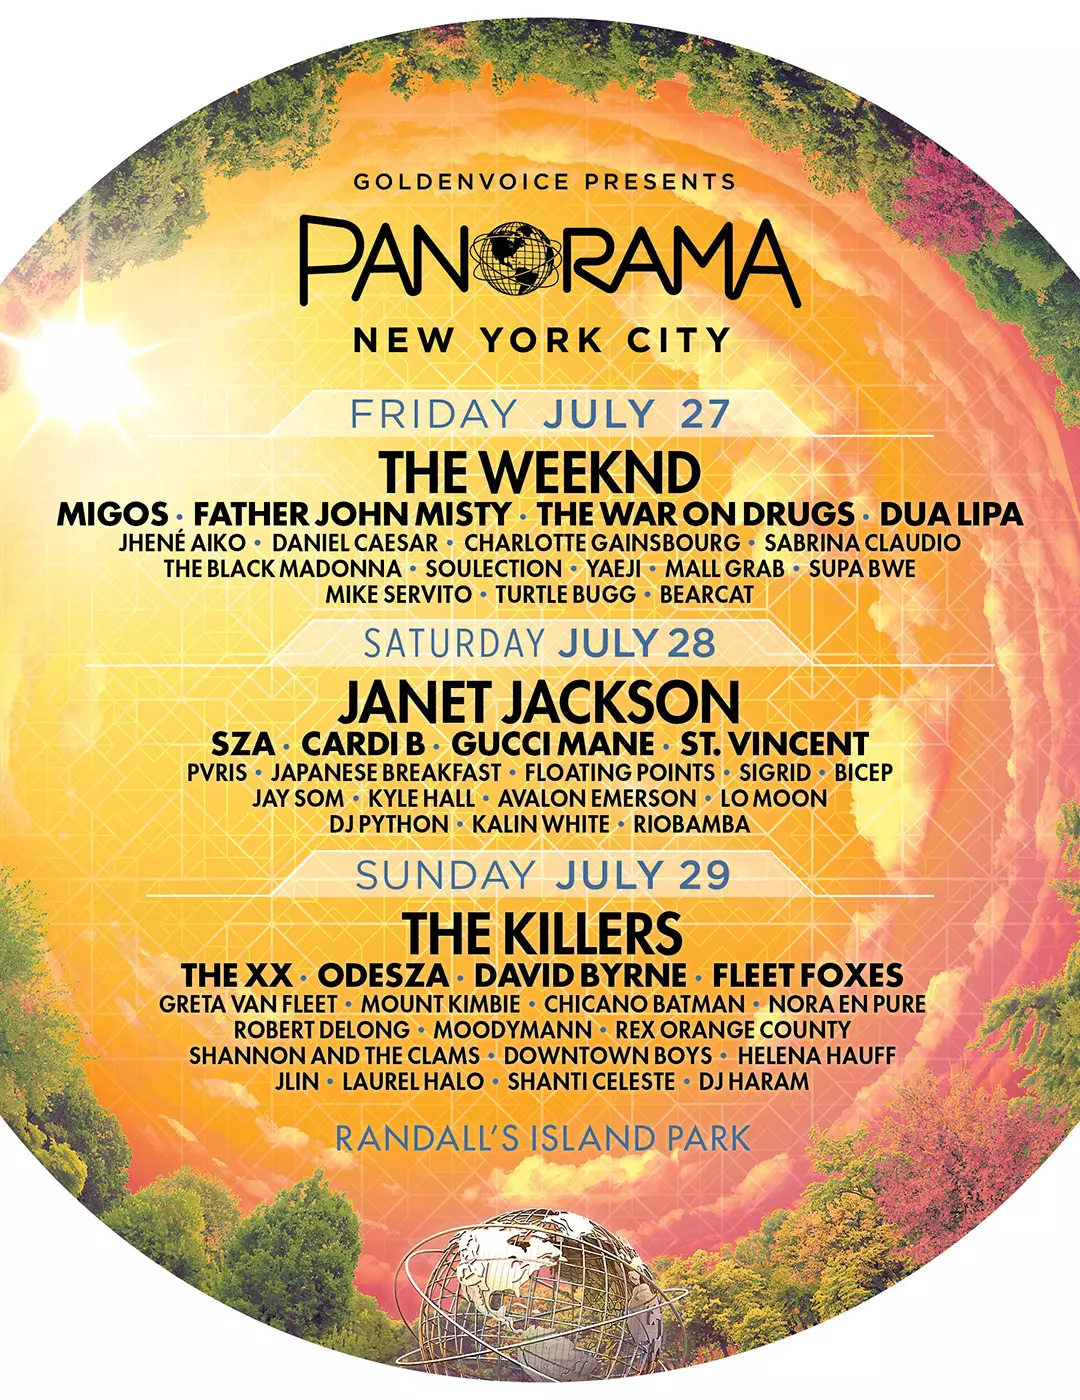 The Weeknd, Migos and More to Perform at 2018 Panorama Festival - XXL